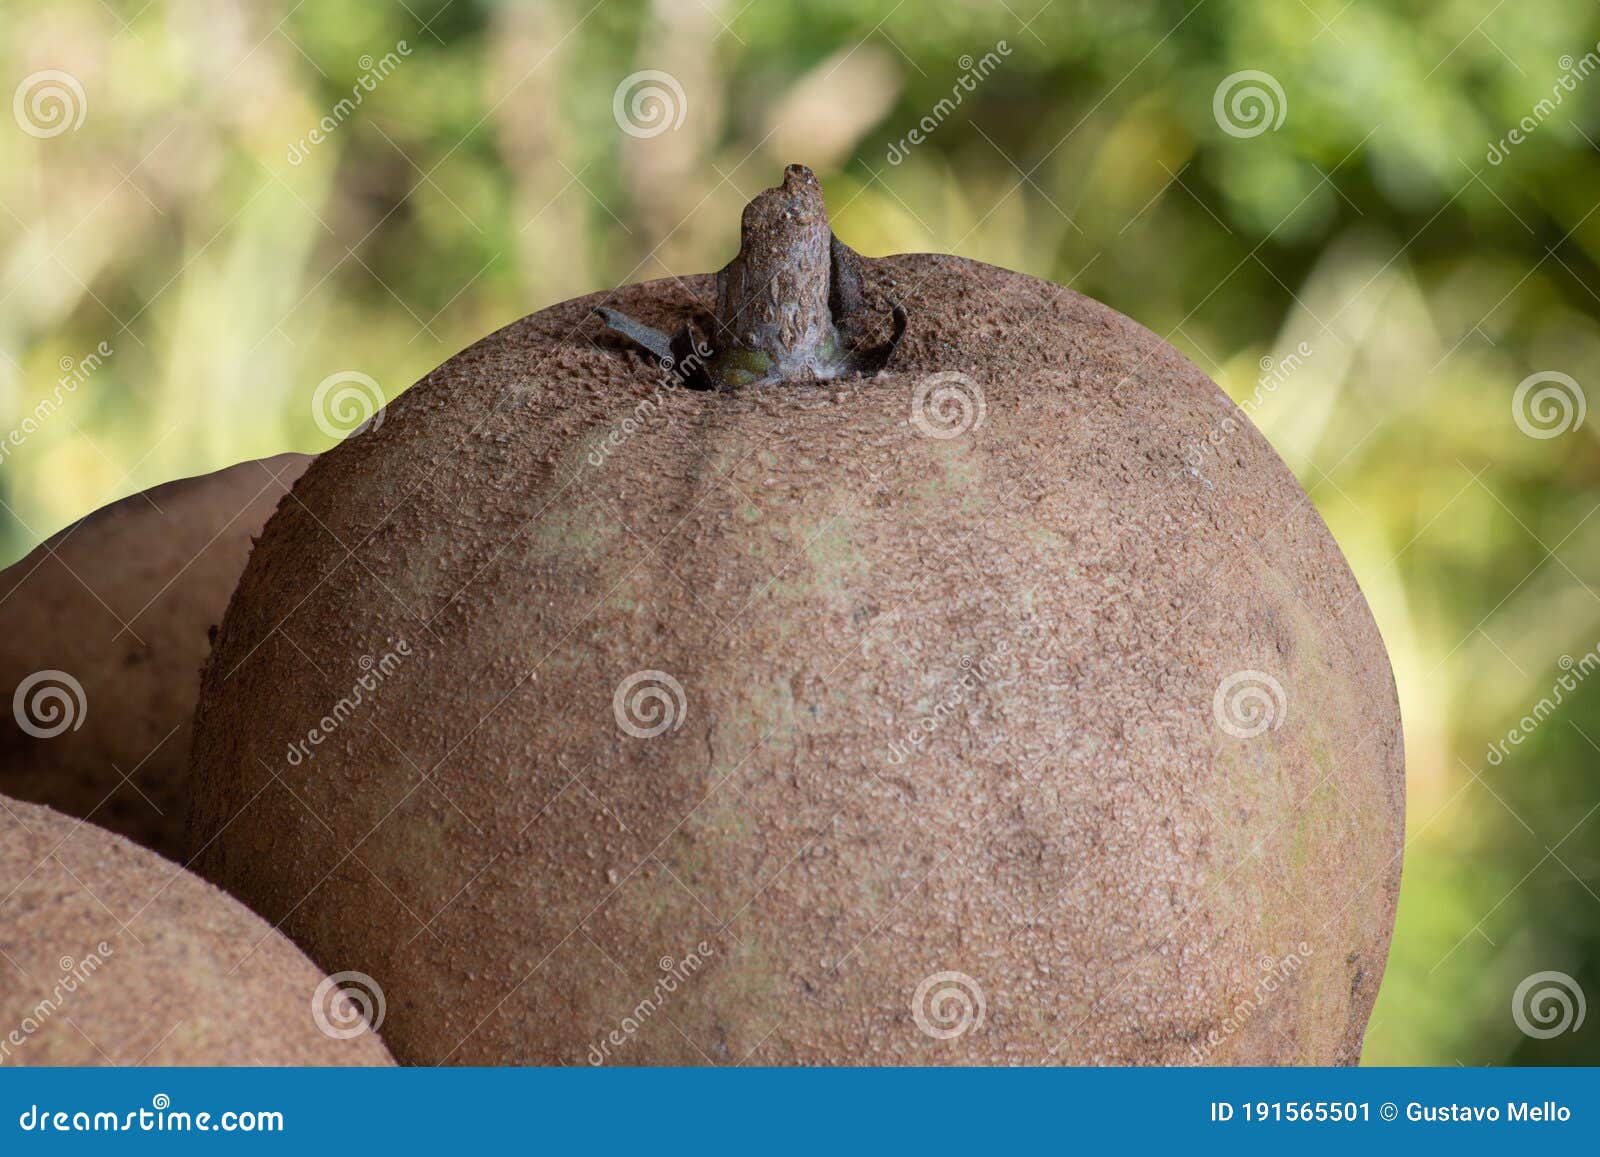 sapodilla fruit exposed with green background